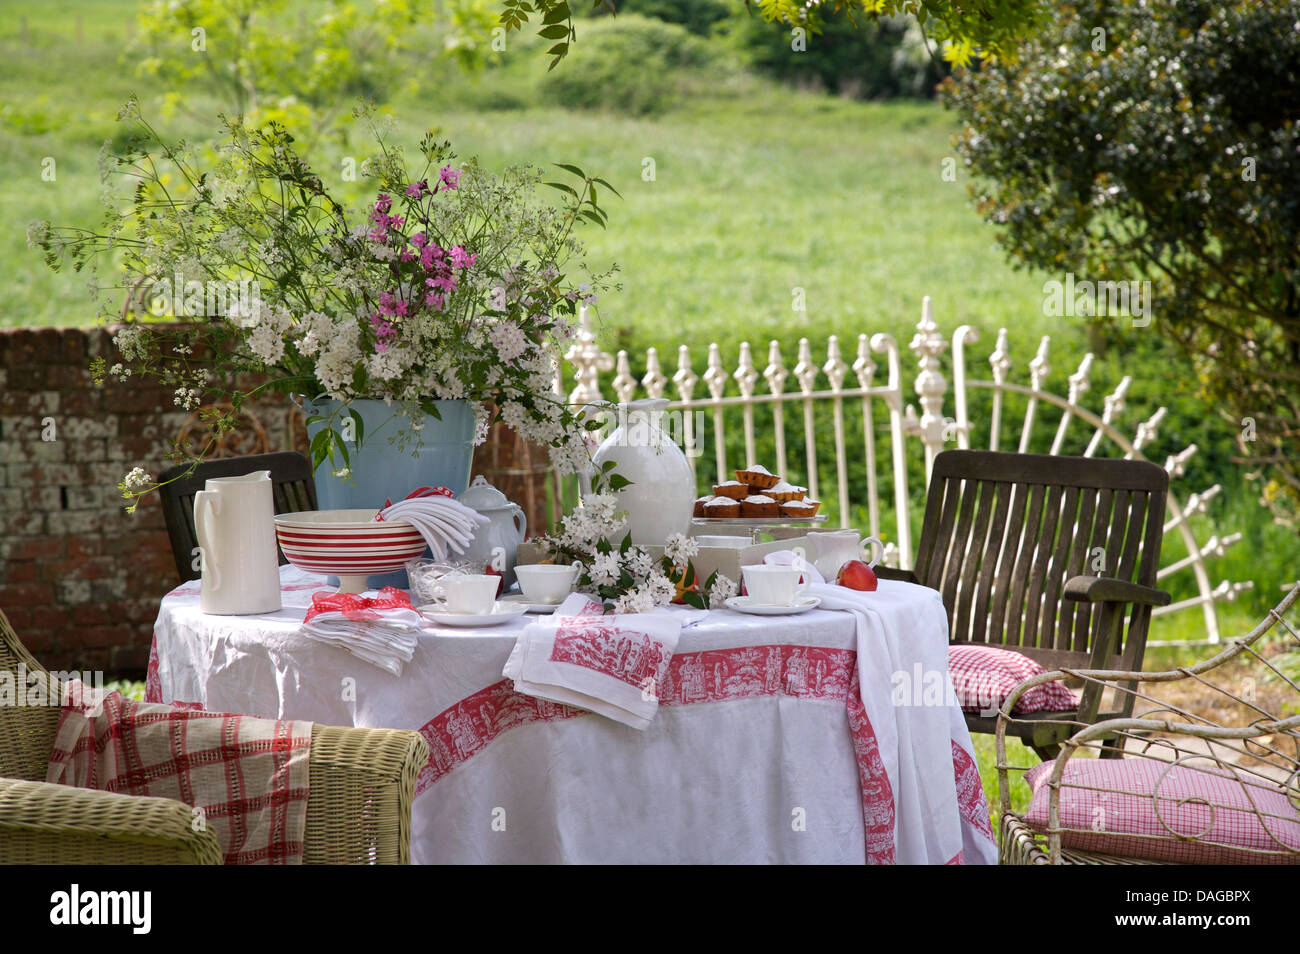 Lawn in country garden with vase of summer flowers on table with jug and bowls and  white linen cloth edged with red Stock Photo